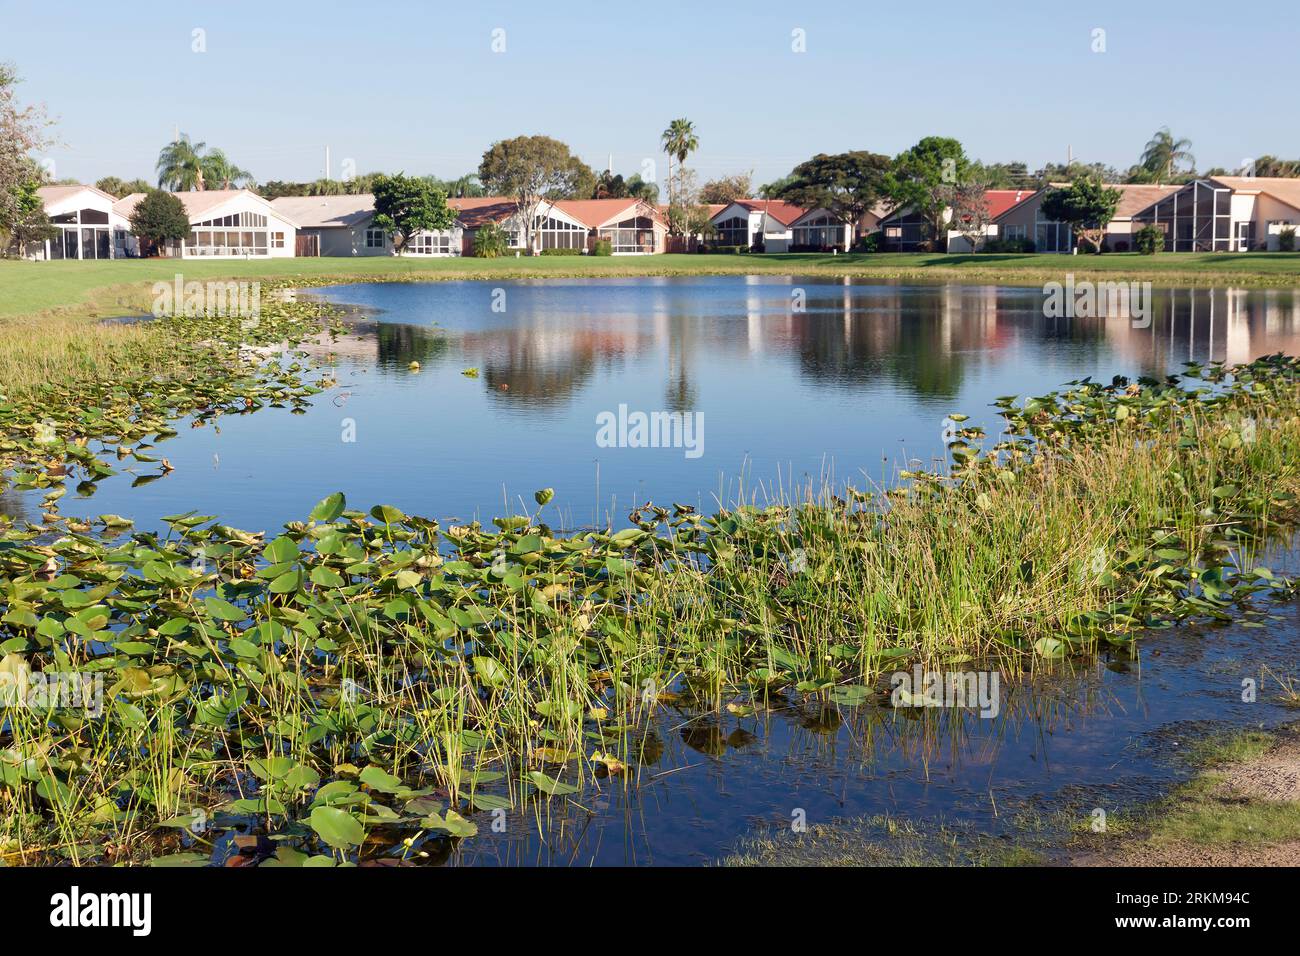 Fresh water lake in a Florida gated community. Stock Photo